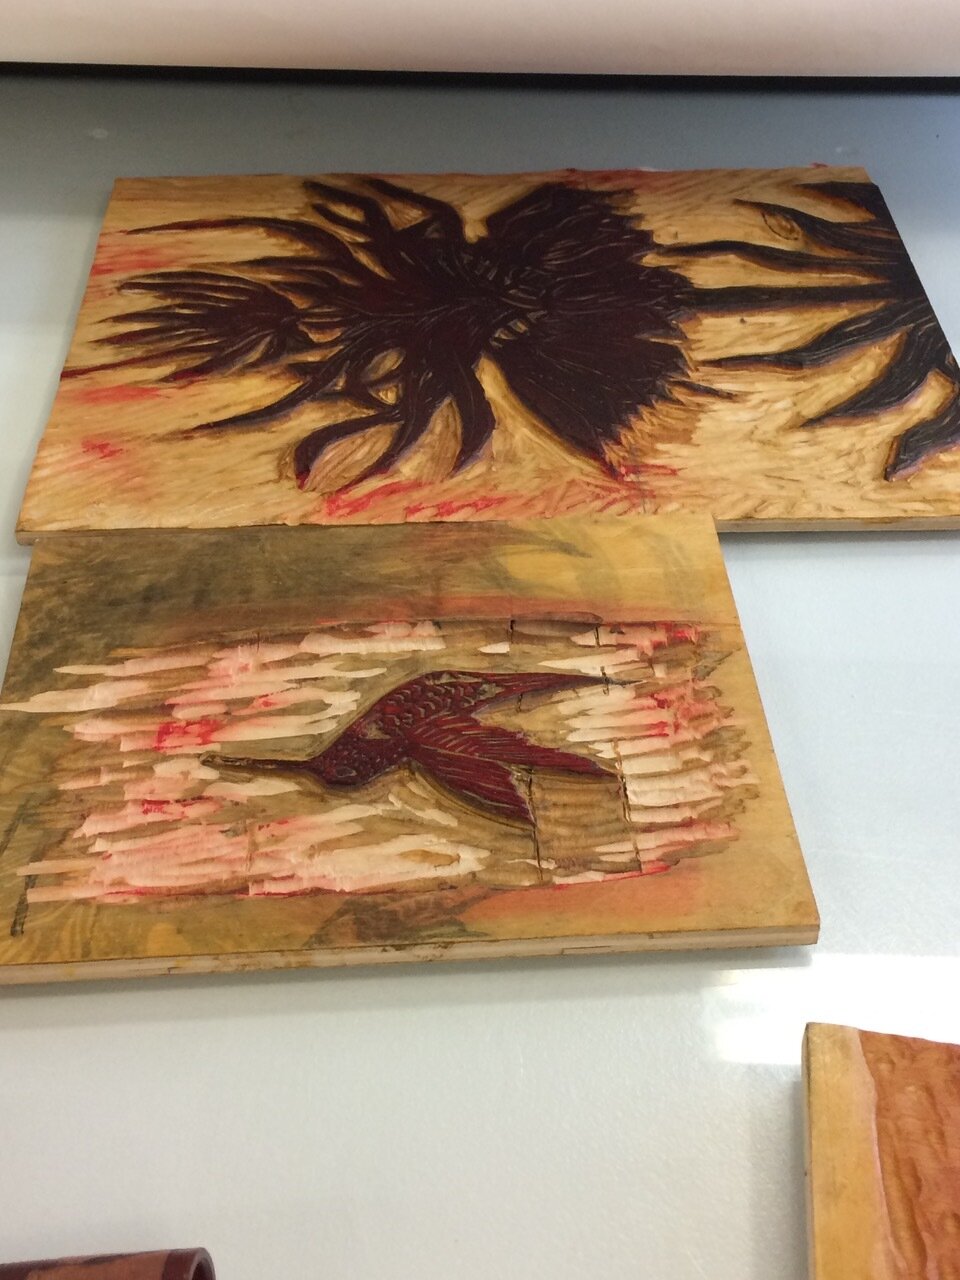  Woodblocks carved by Whitney. 